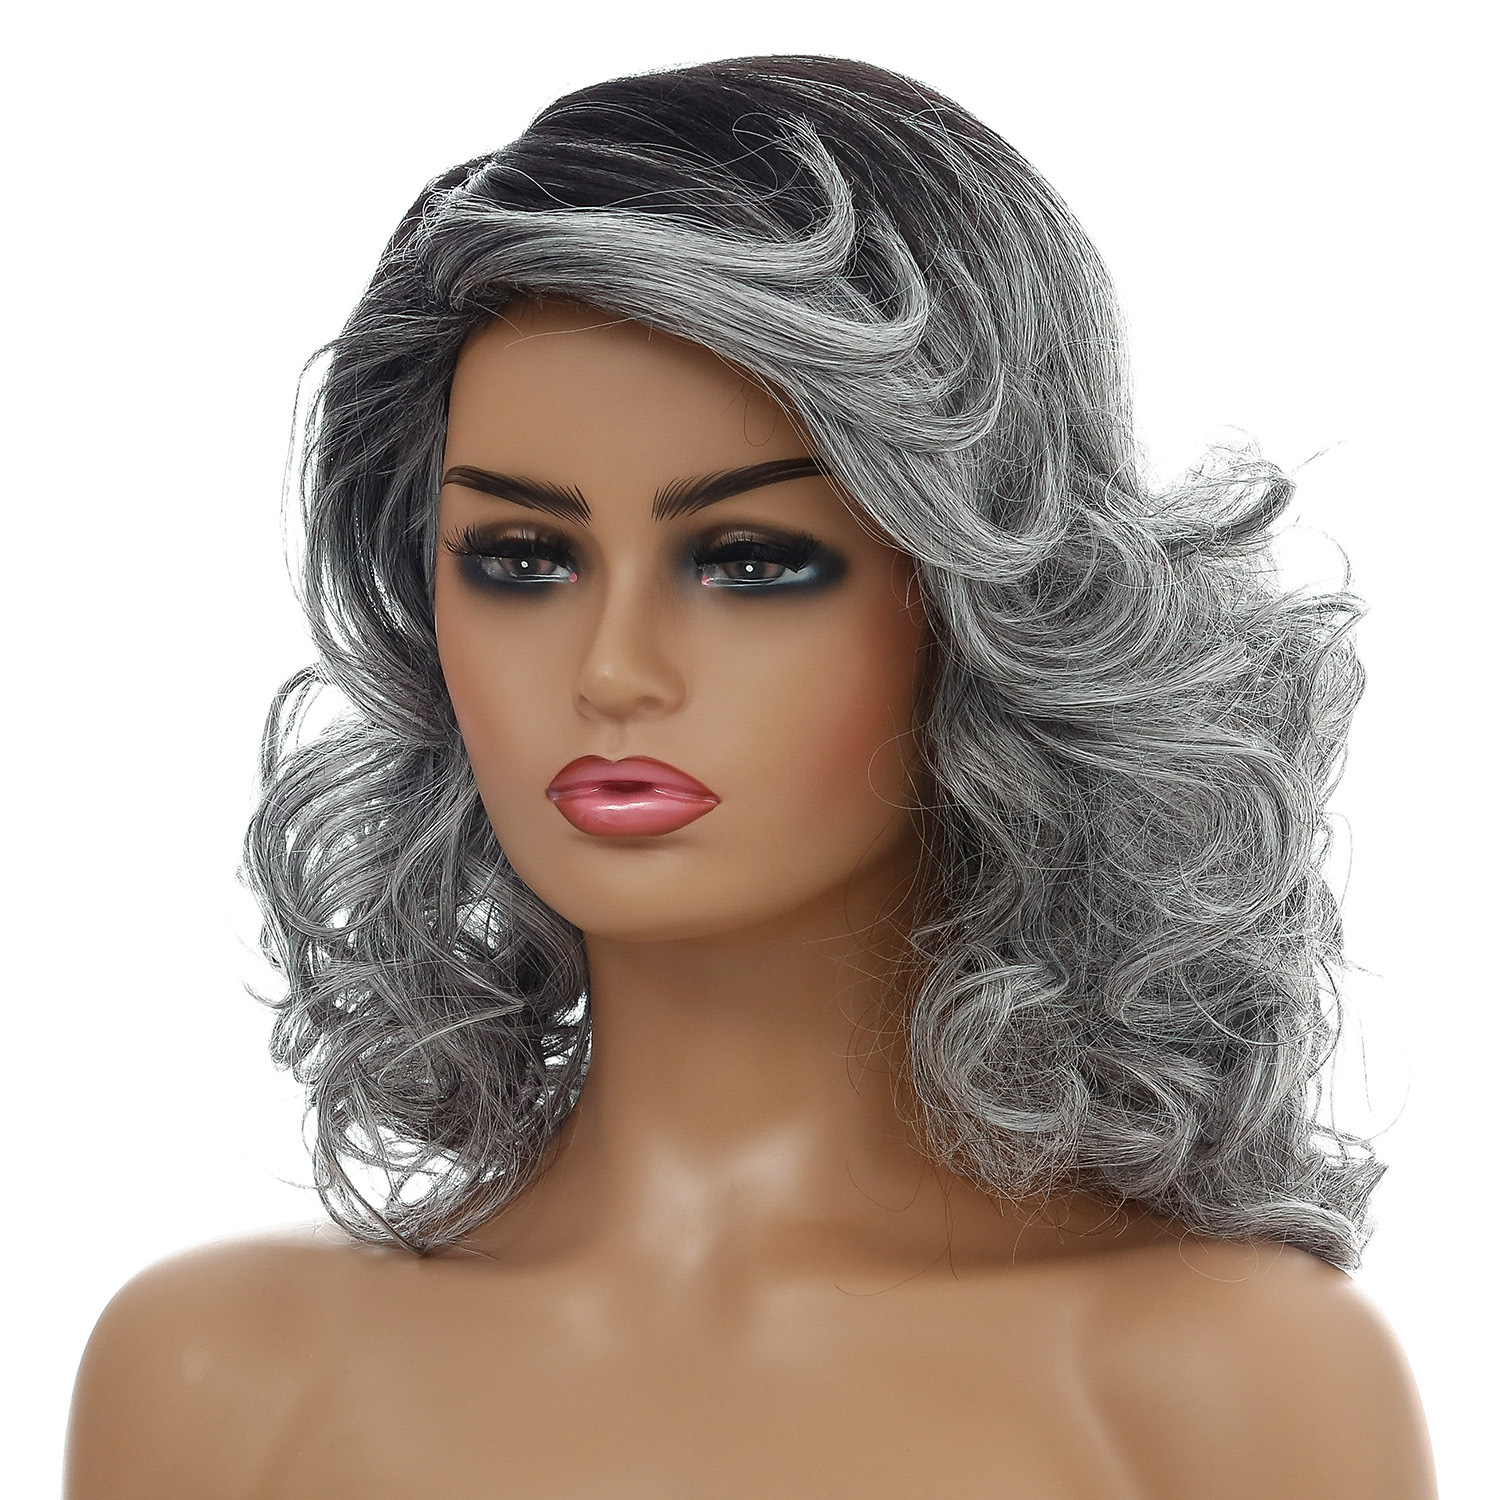 Fashionable black silver synthetic wig with medium-length curly hair, perfect for women